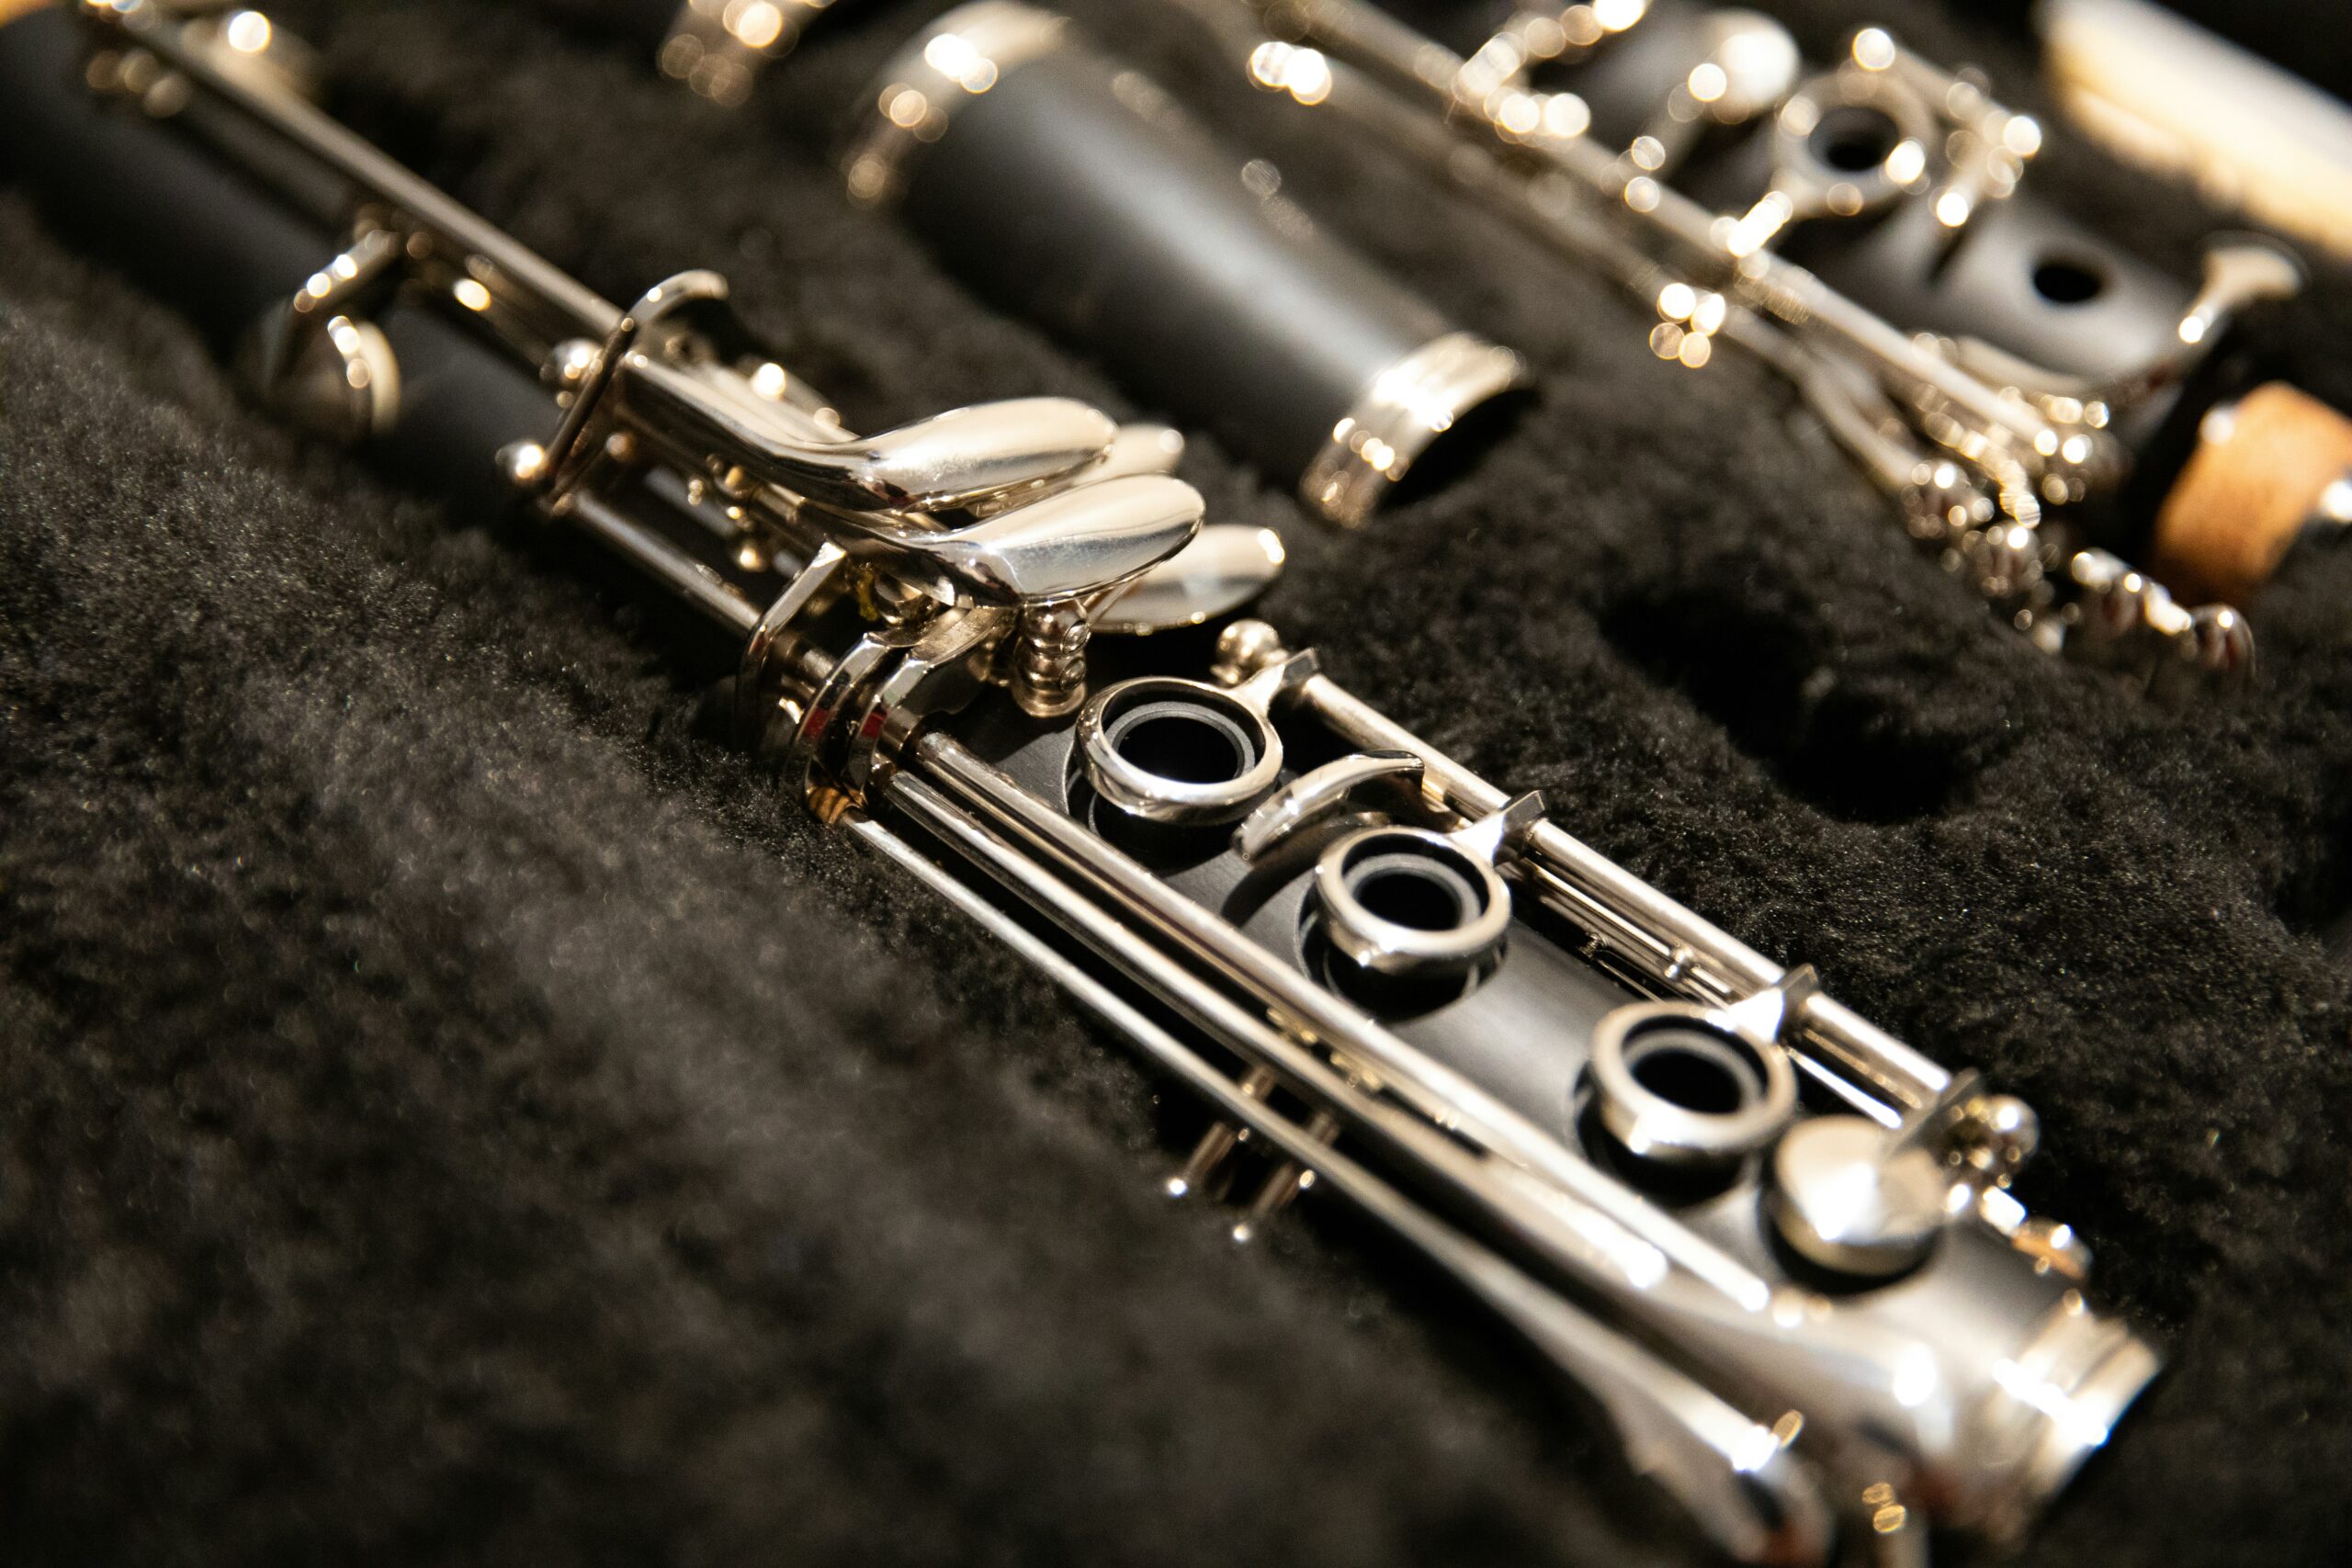 History of the clarinet: its invention, evolution and famous clarinet makers